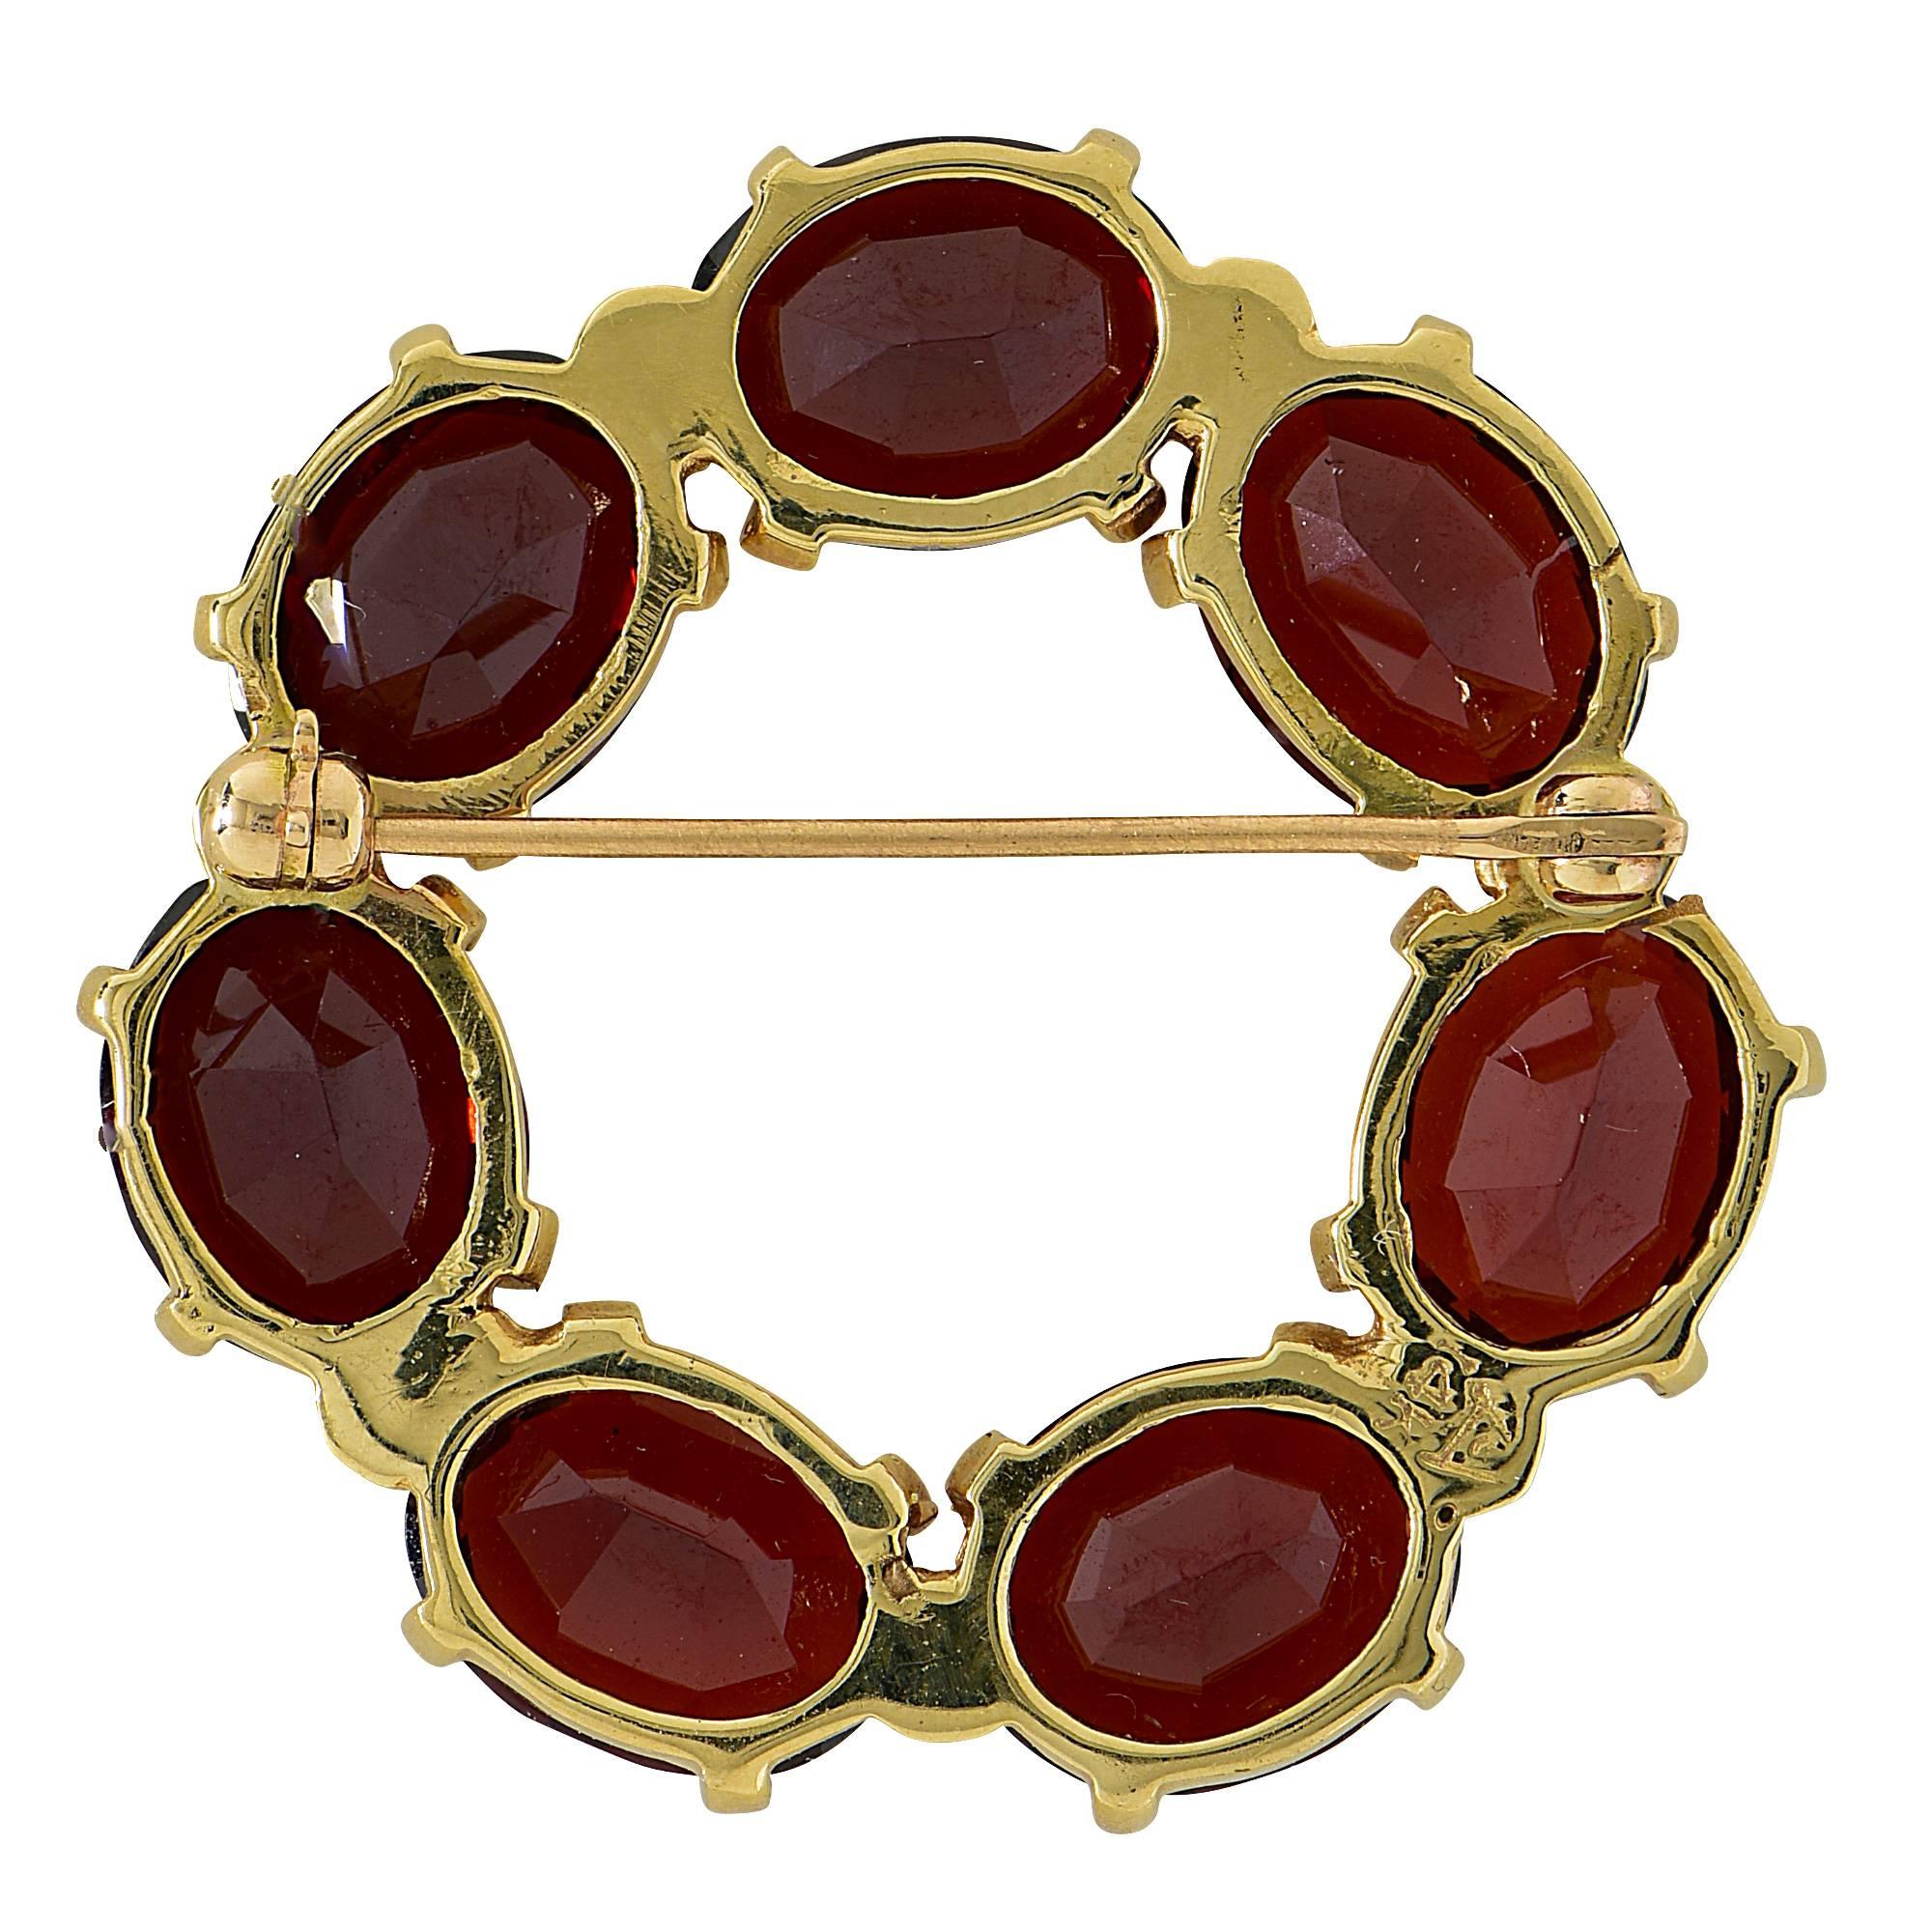 14k yellow gold rhodolite garnet brooch.

The brooch measure 1.25 inches in height by 1.36 inches in width by .27 inch in depth.
It is stamped and tested as 14k gold.
The metal weight is 9.25 grams.

This brooch is accompanied by a retail